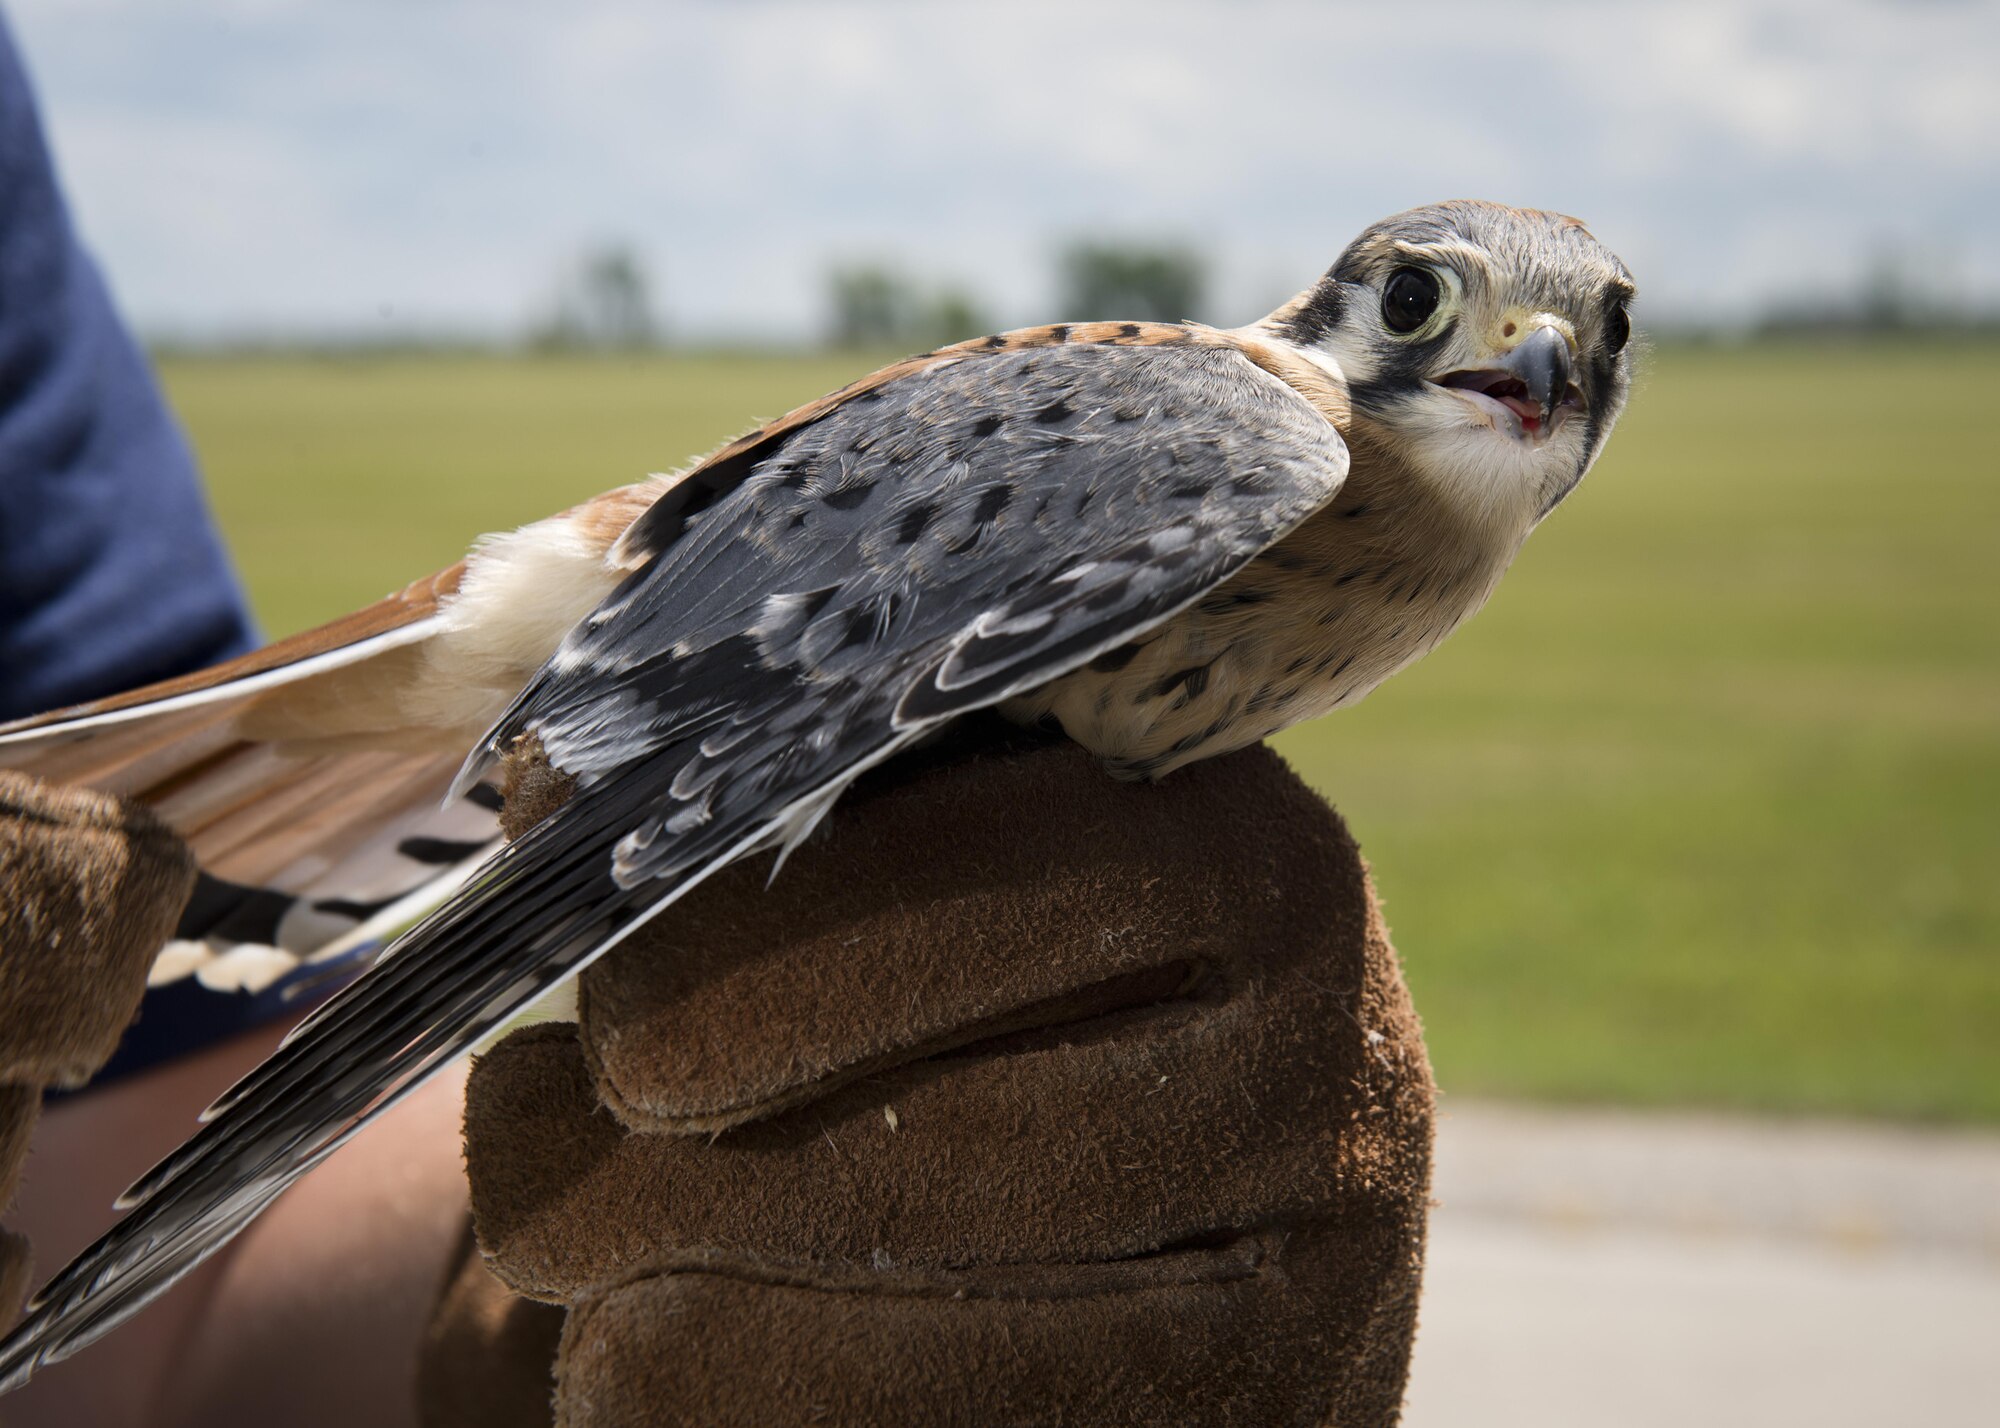 Dale Waites, U.S. Department of Agriculture wildlife biologist, holds an American kestrel on the airfield at Minot Air Force Base, N.D., July 15, 2016. The American kestrel is the most common falcon in North America and can cause damage to the engines of incoming and outgoing B-52H Stratofortresses. (U.S. Air Force photo/Airman 1st Class J.T. Armstrong)